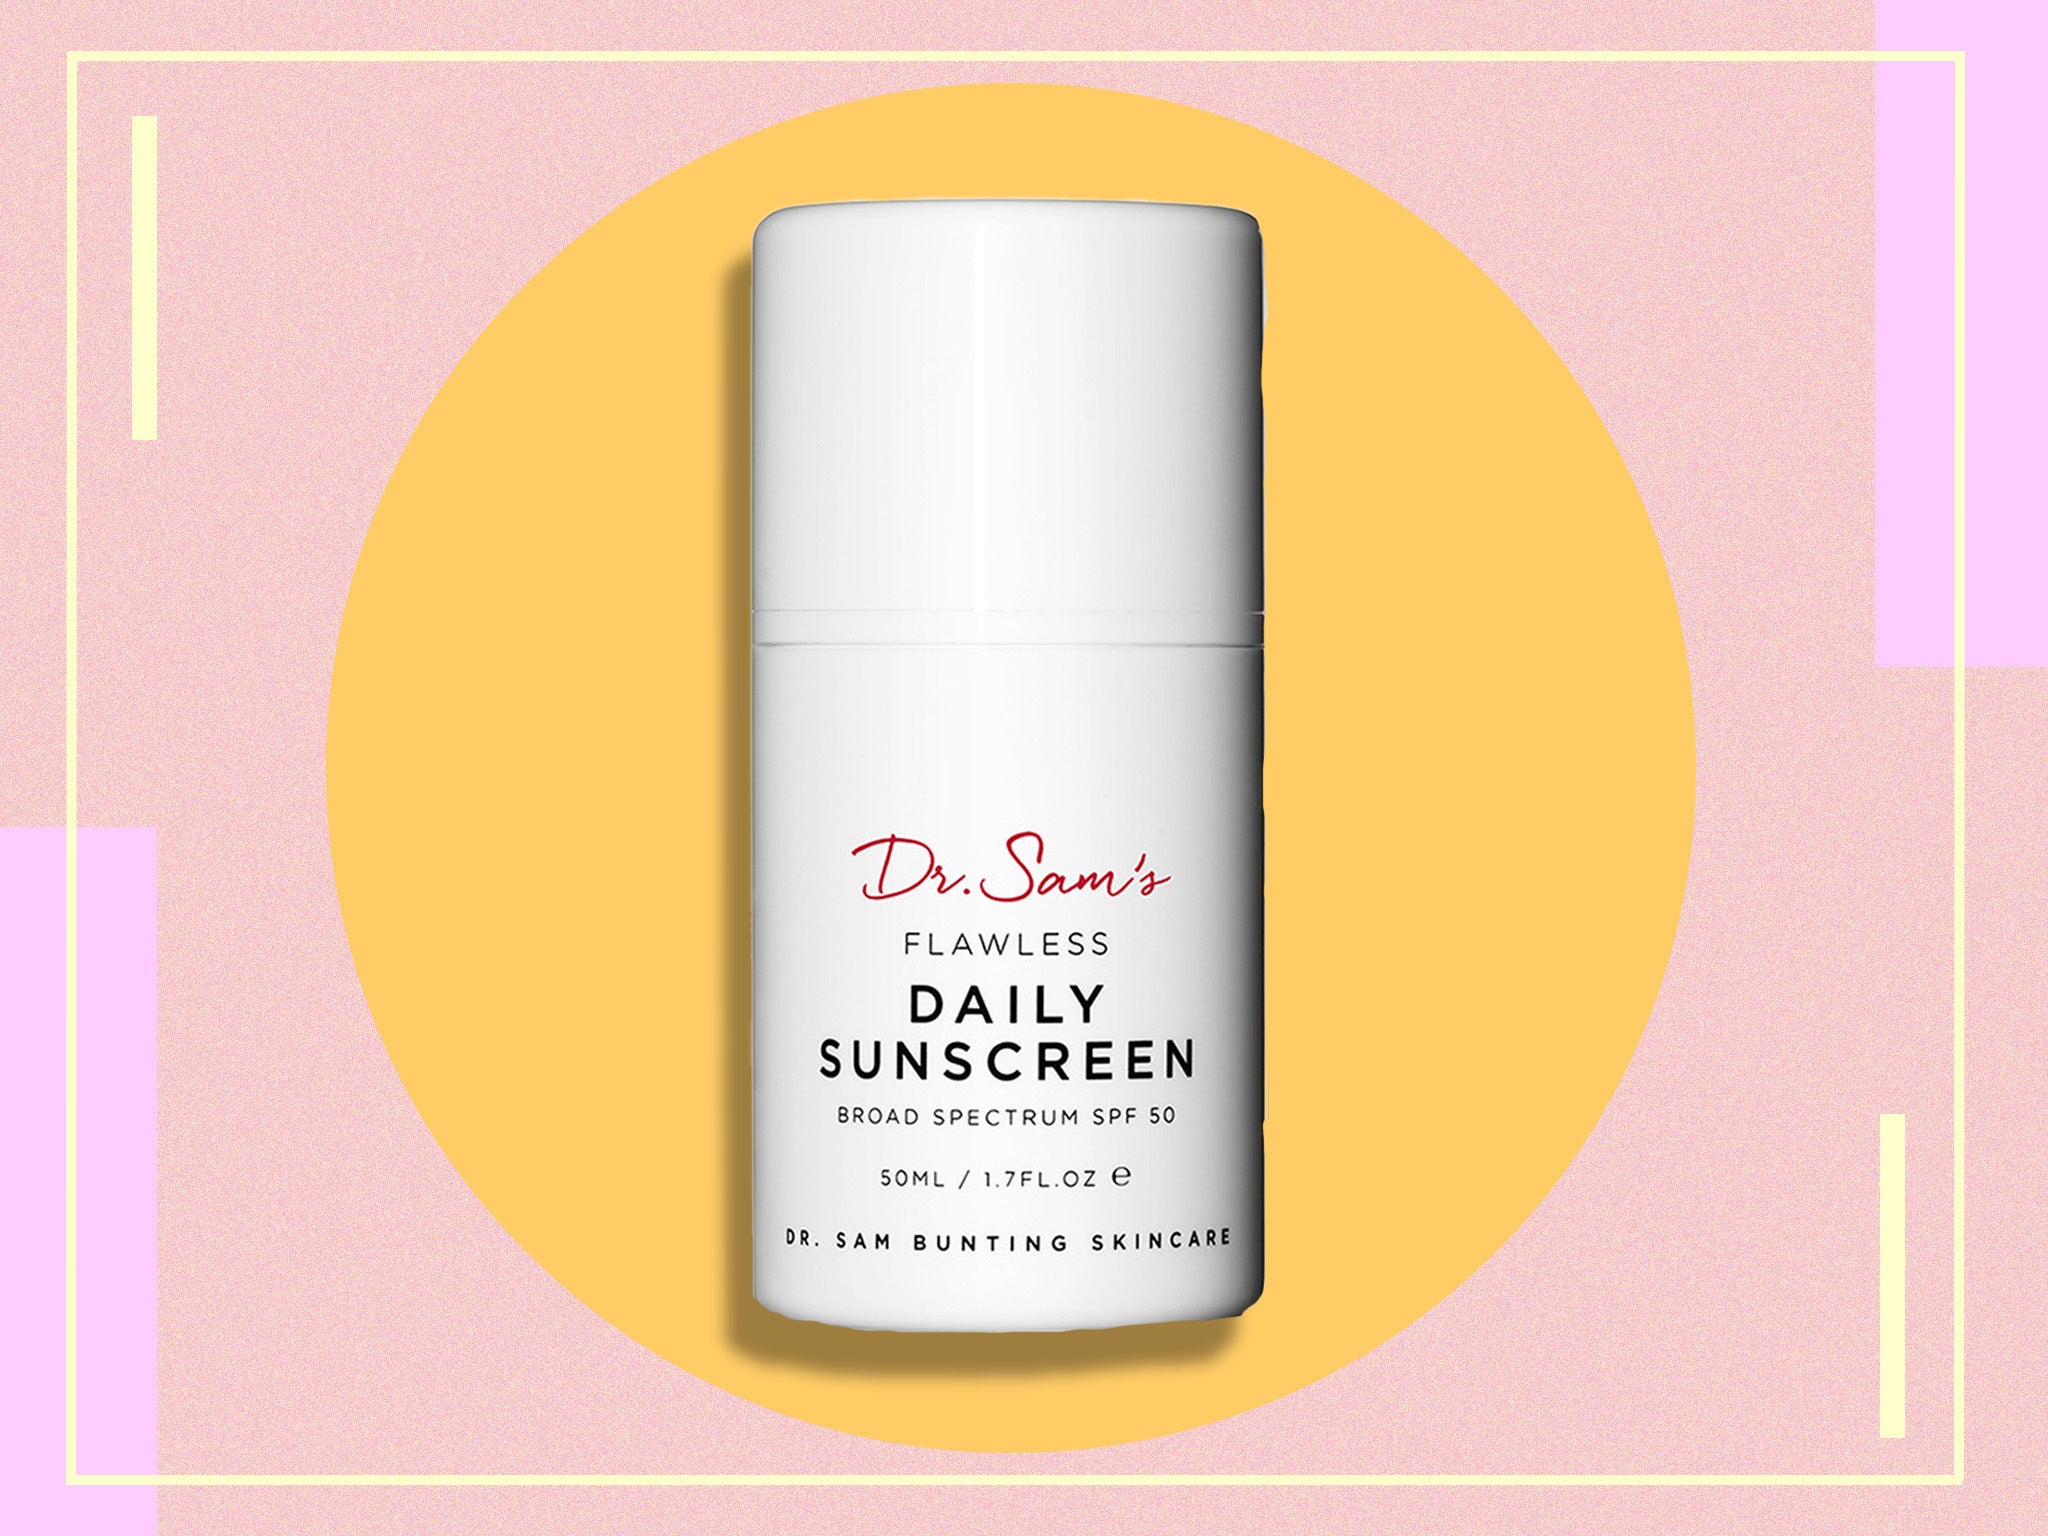 The fragrance-free formula suits easily irritated skin